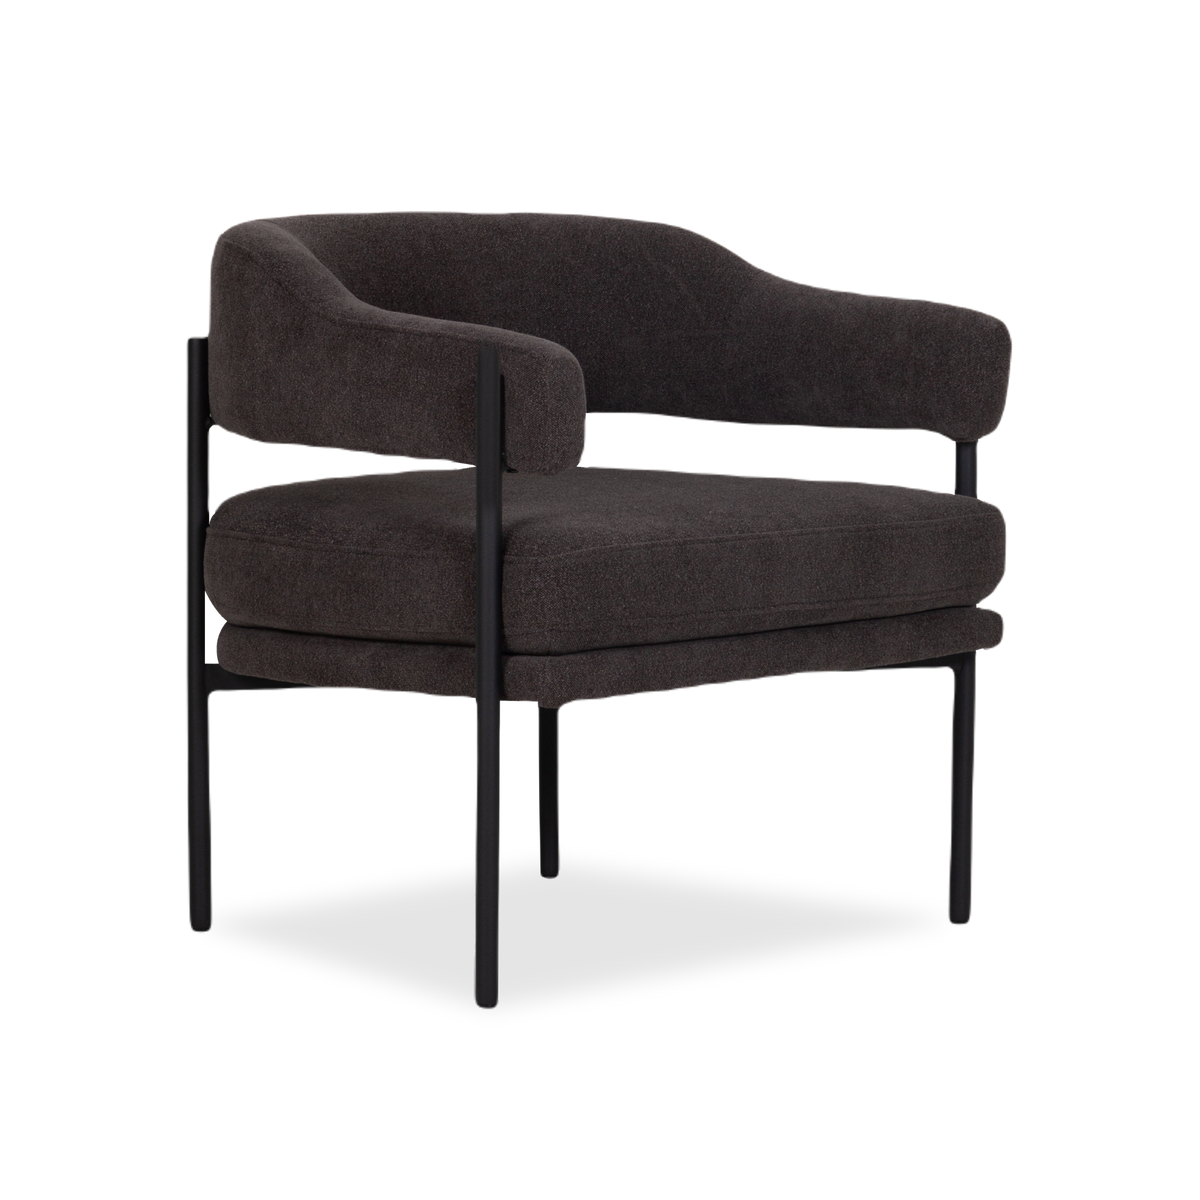 Balancing modern and traditional elements, the Miles Lounge Chair takes an architectural approach.